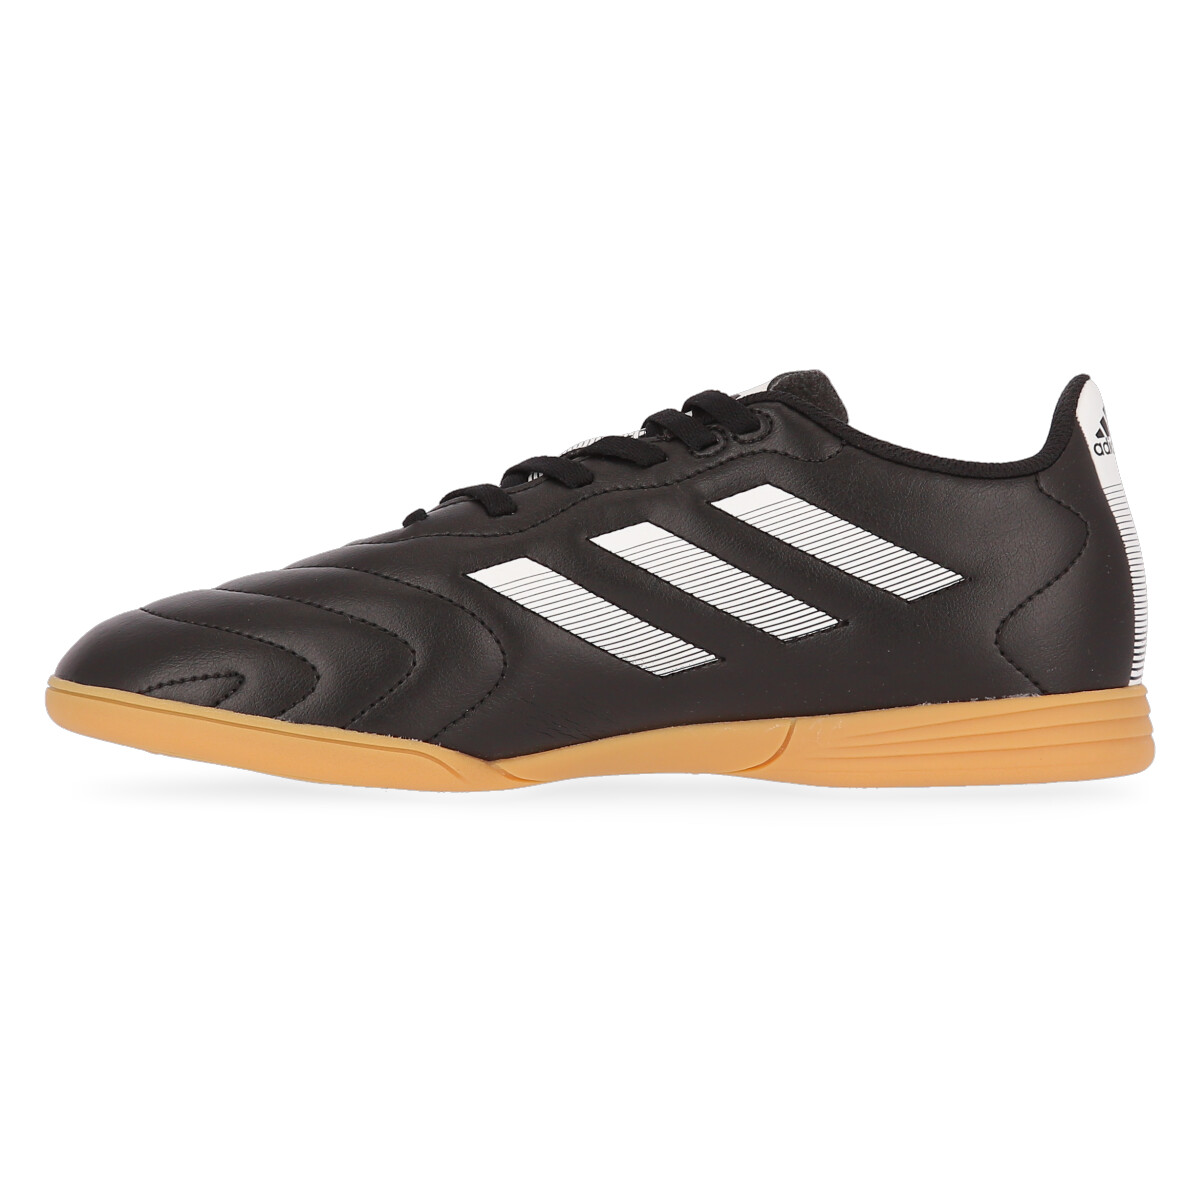 Botines adidas Goletto Viii In,  image number null